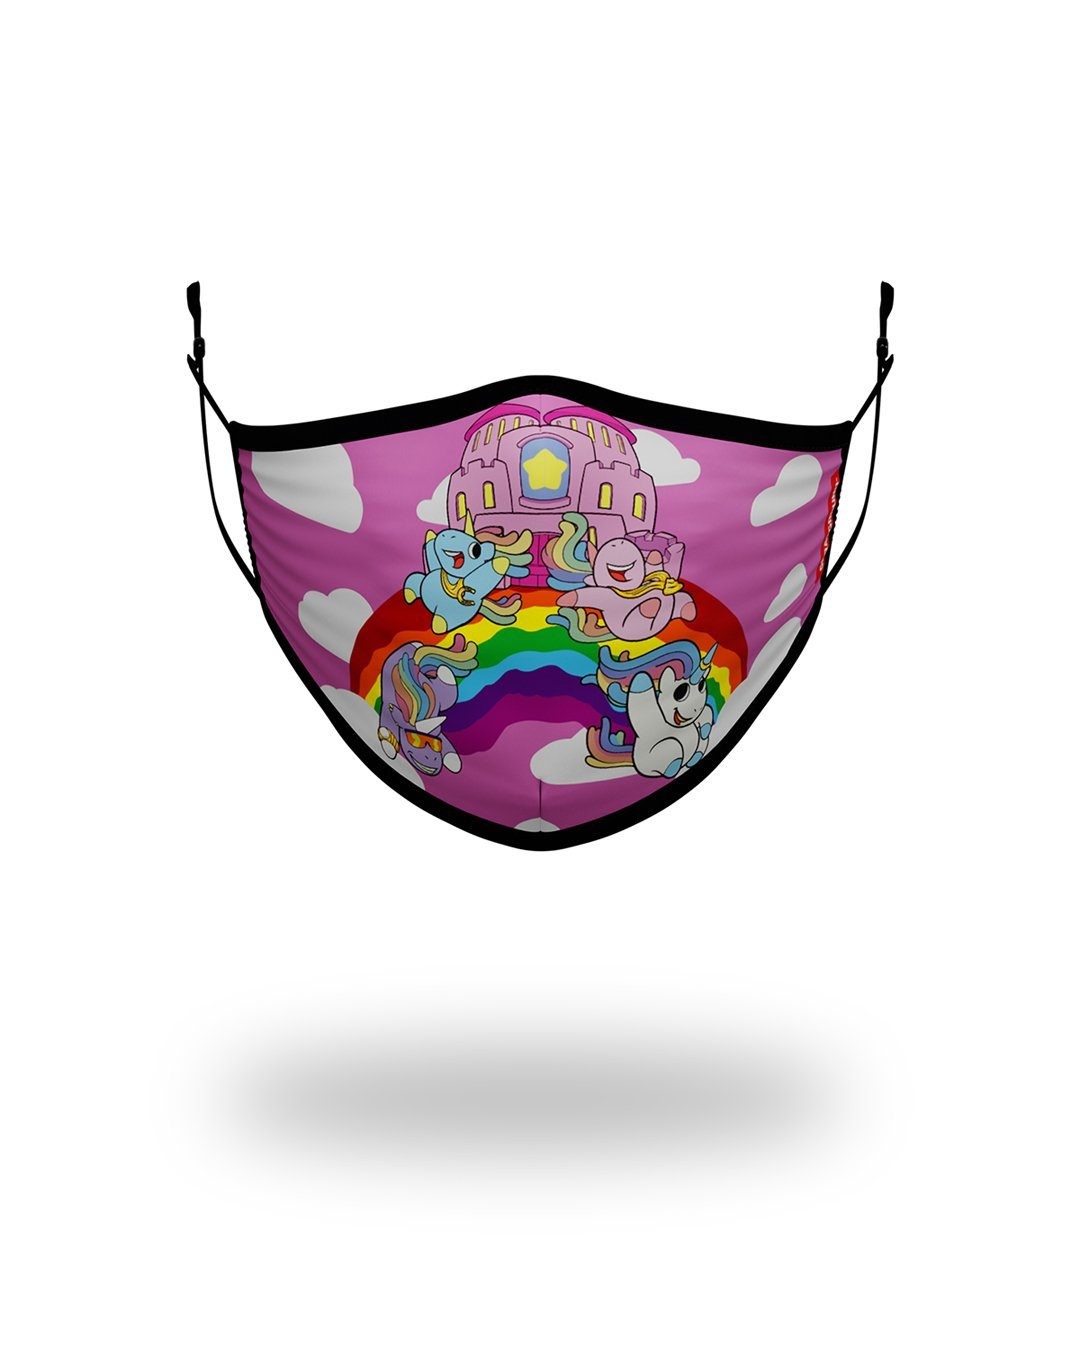 Discount | Kids Form Fitting Mask: Rainbow Bounce Sprayground Sale - Discount | Kids Form Fitting Mask: Rainbow Bounce Sprayground Sale-31